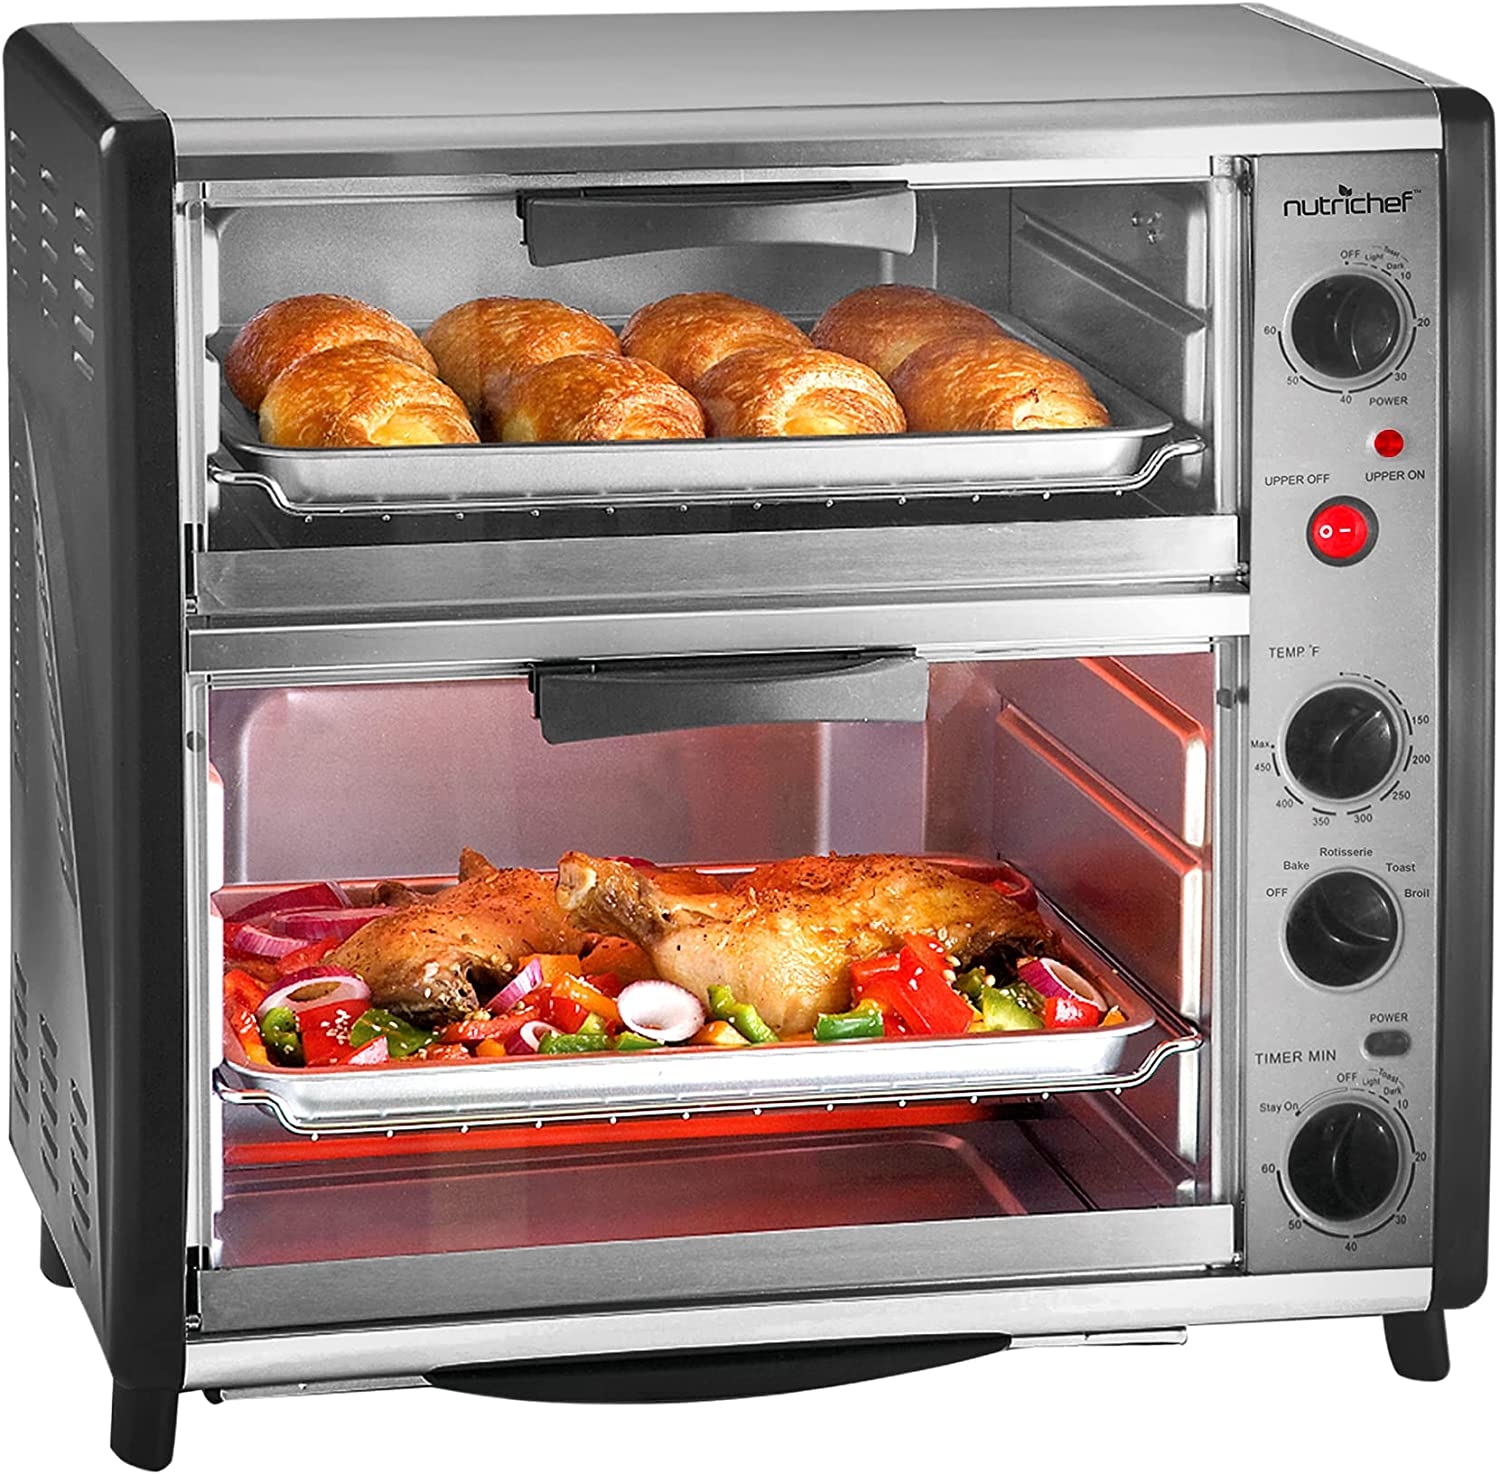 NutriChefKitchen Multi-Functional Dual Oven Cooker, Toaster, Broiler Roast And Rotisserie Convection Cooking Ready, Large